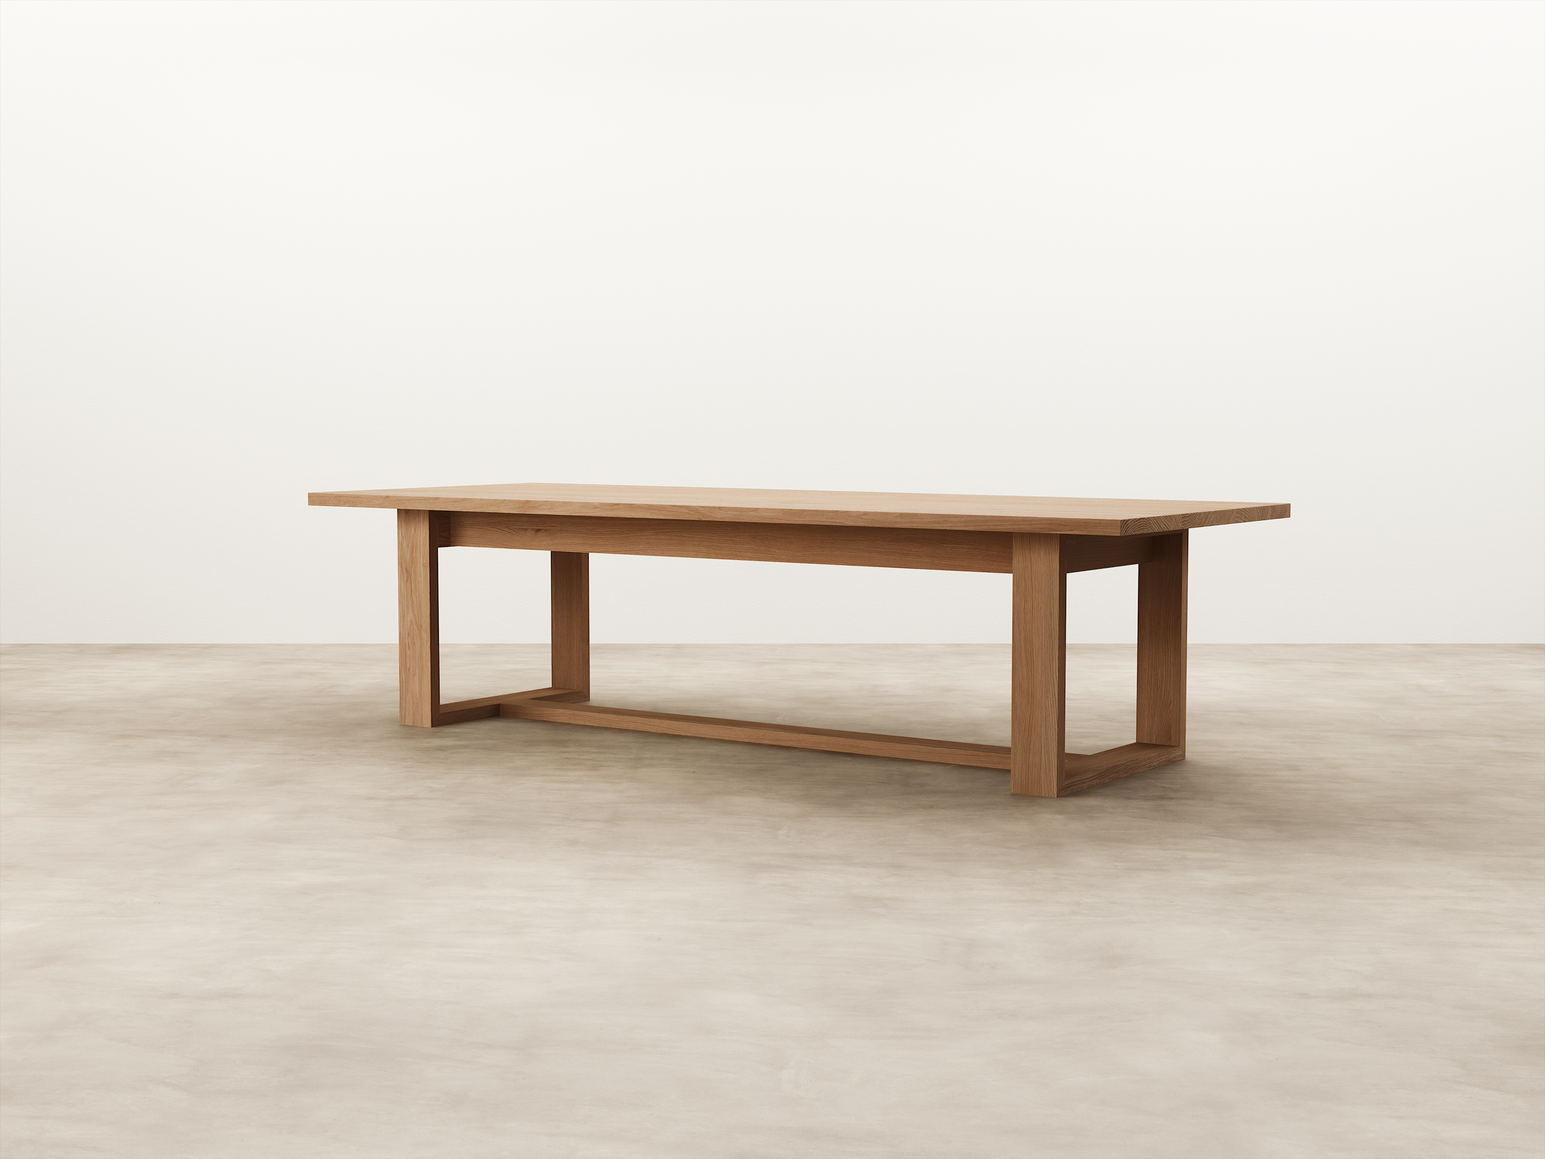 Eden Dining Table